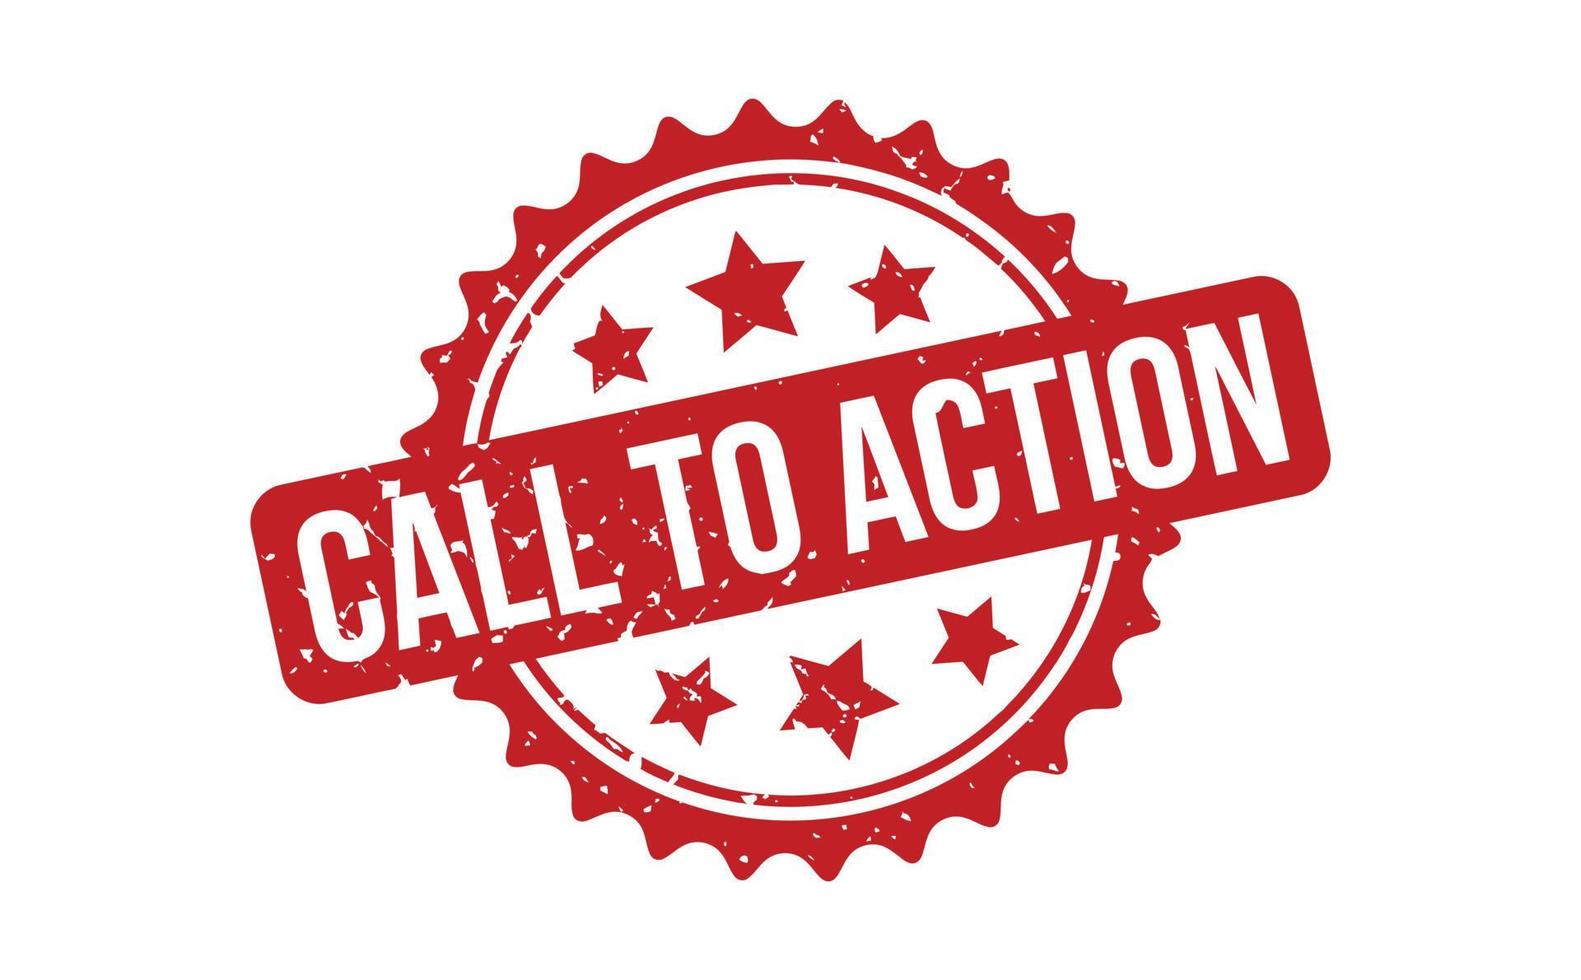 Call To Action Rubber Stamp. Red Call To Action Rubber Grunge Stamp Seal Vector Illustration